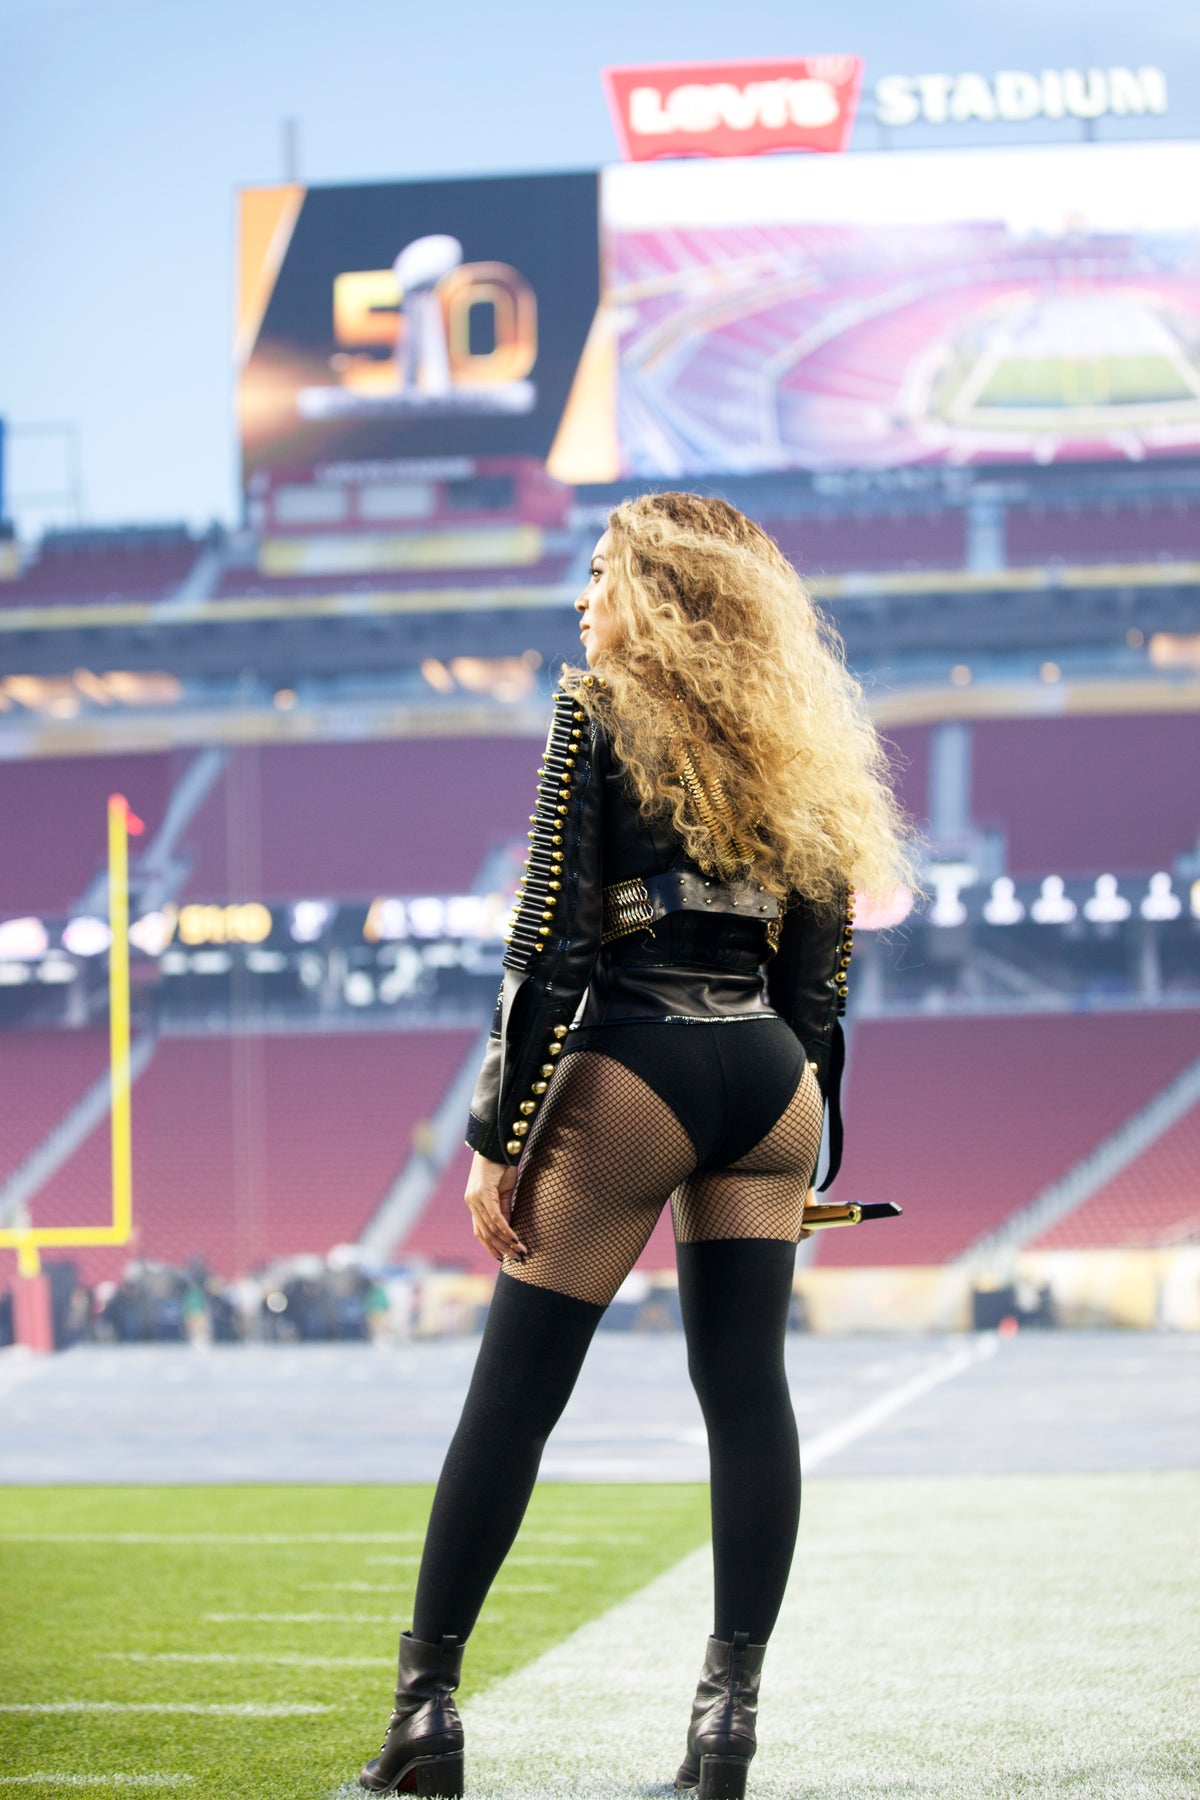 See Stunning Photos Of Beyonce's Super Bowl Performance You Won't Find